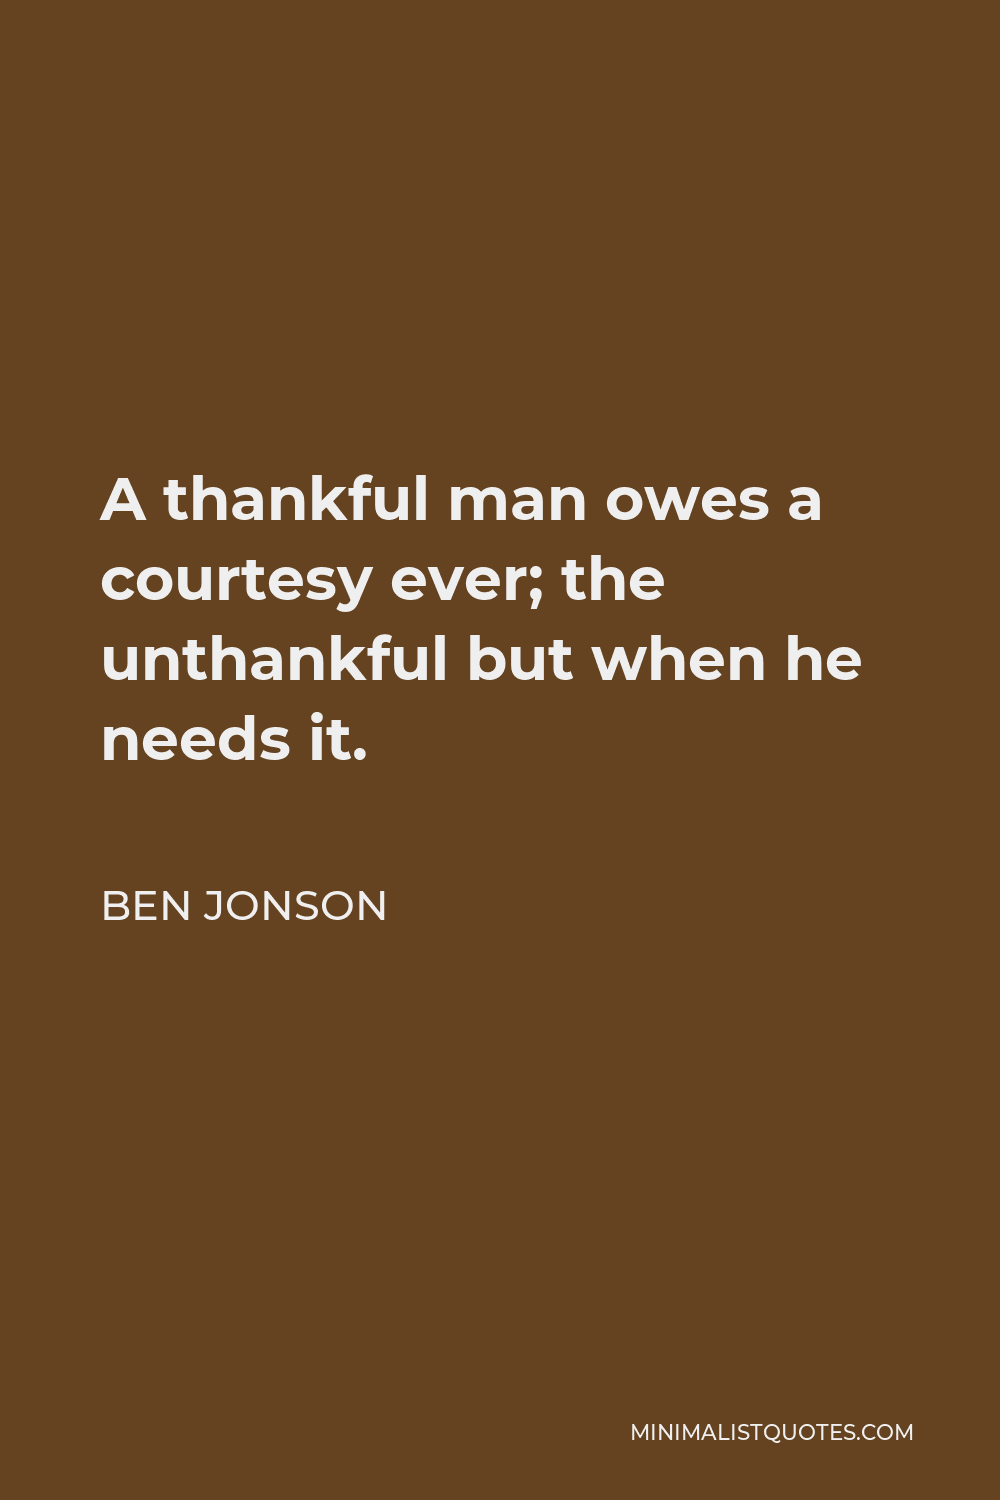 Ben Jonson Quote - A thankful man owes a courtesy ever; the unthankful but when he needs it.